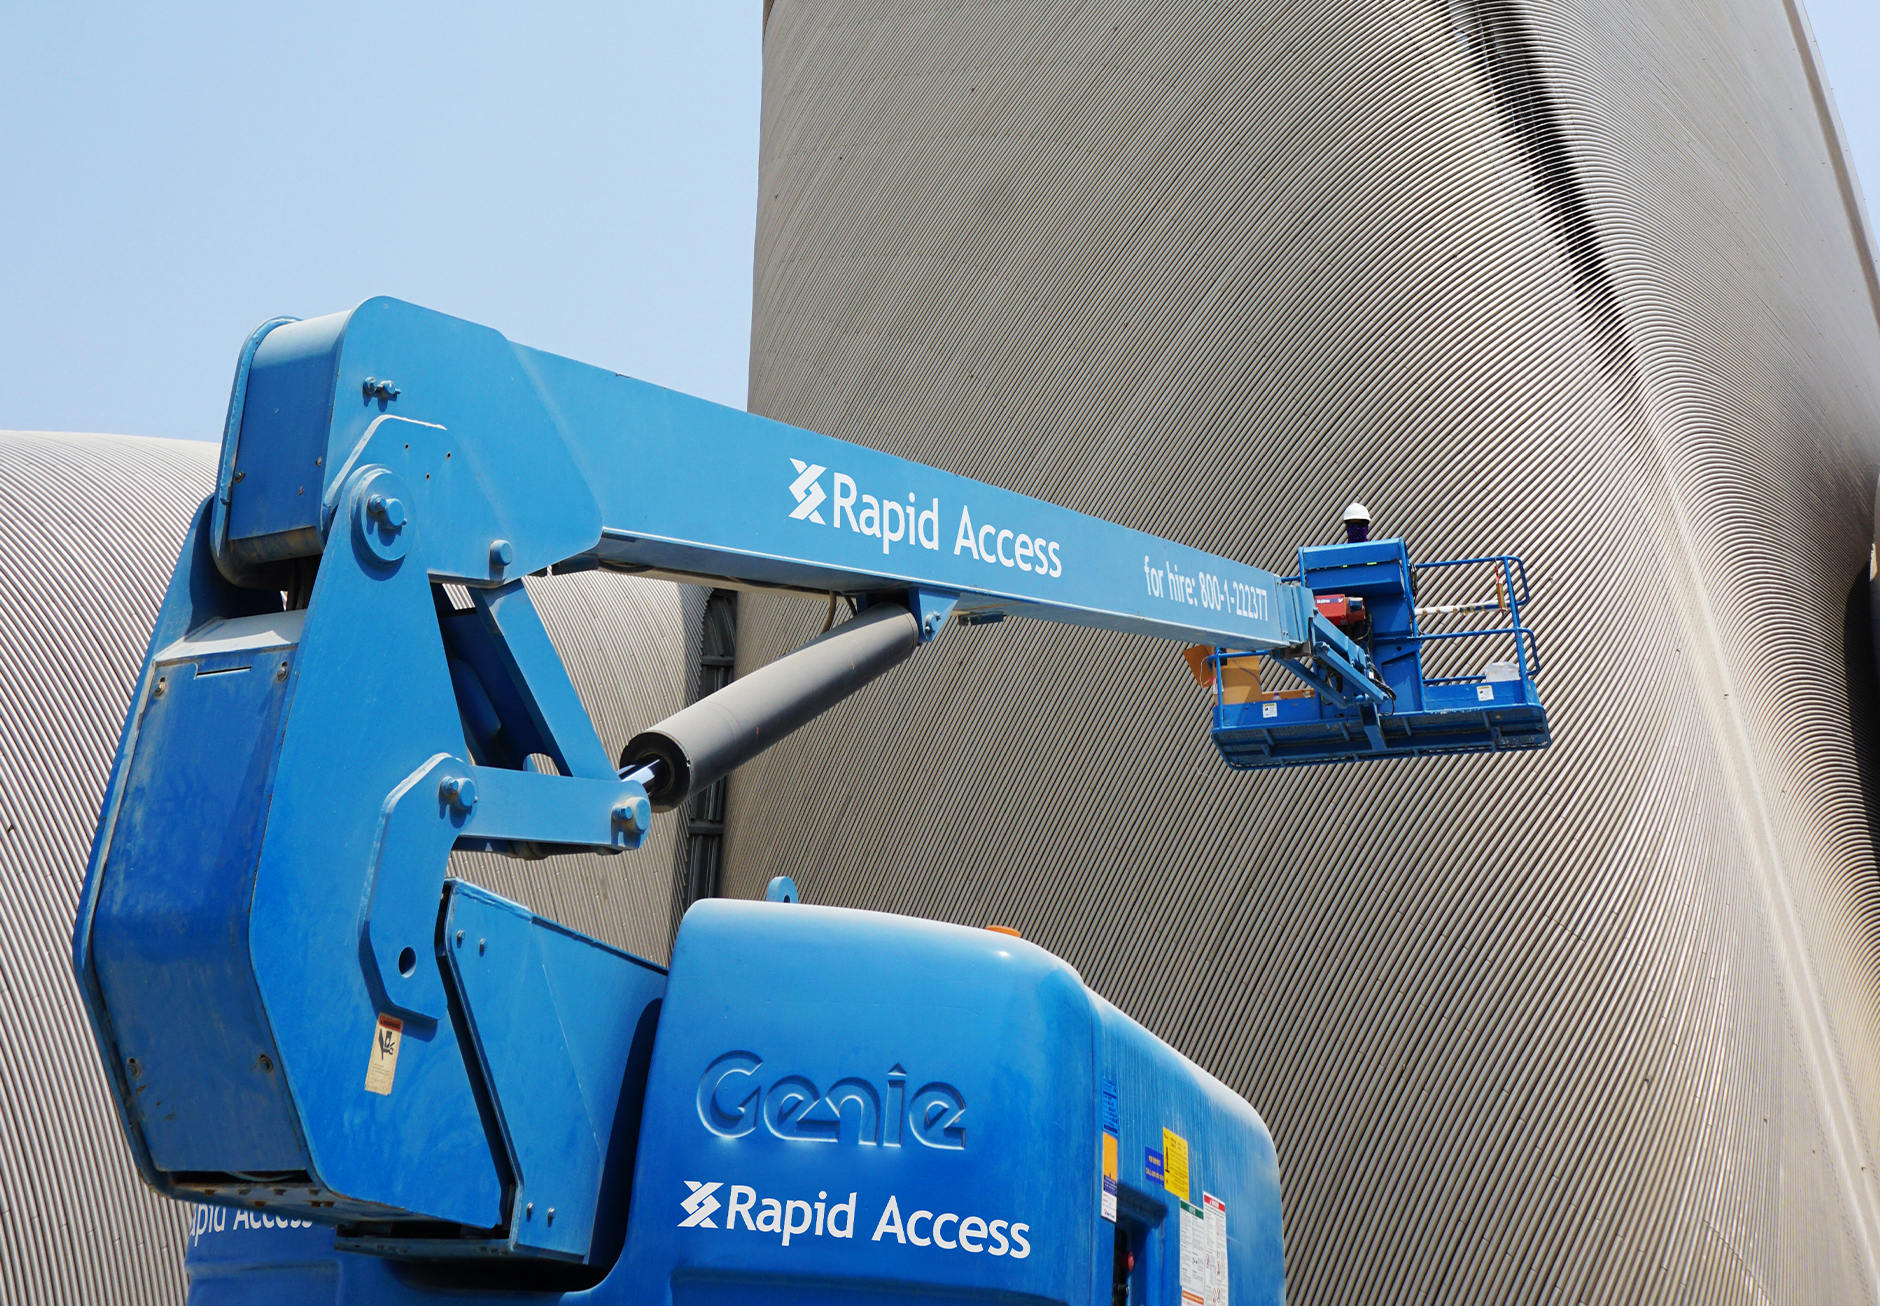 We are Rapid Access, the Middle East's market leader in powered access